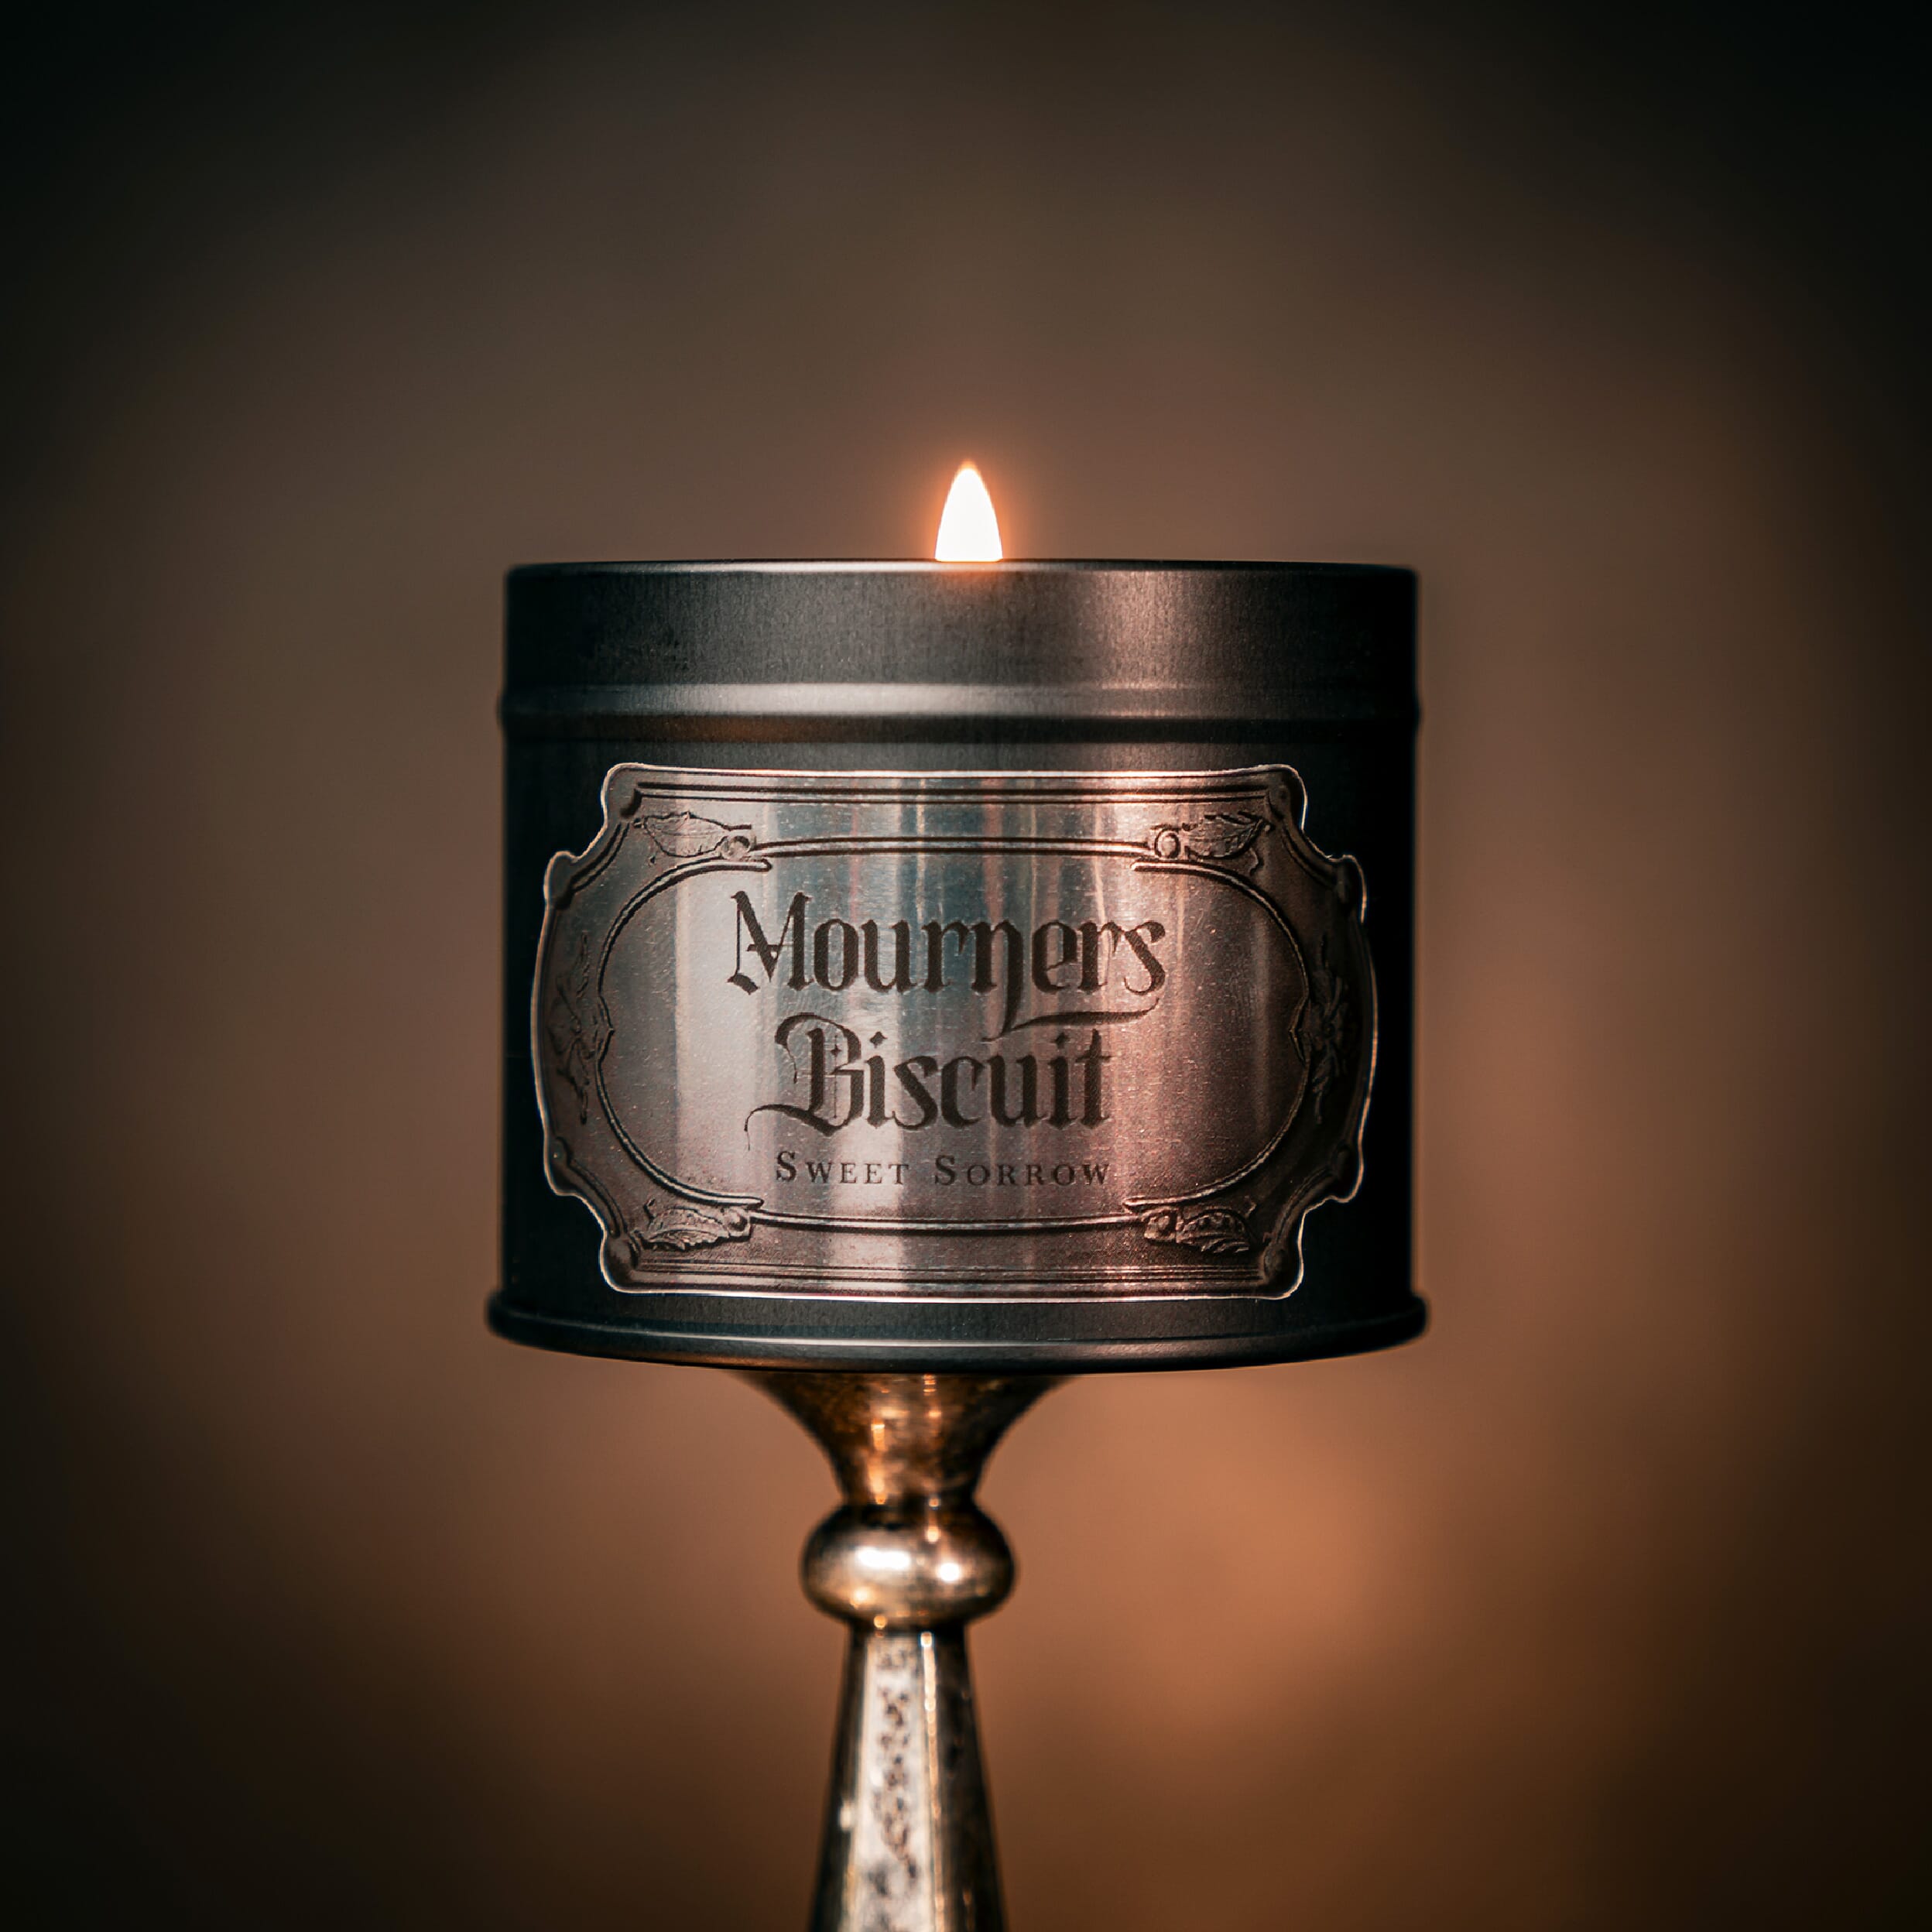 mourners biscuit gothic tin candle the blackened teeth gothic candles